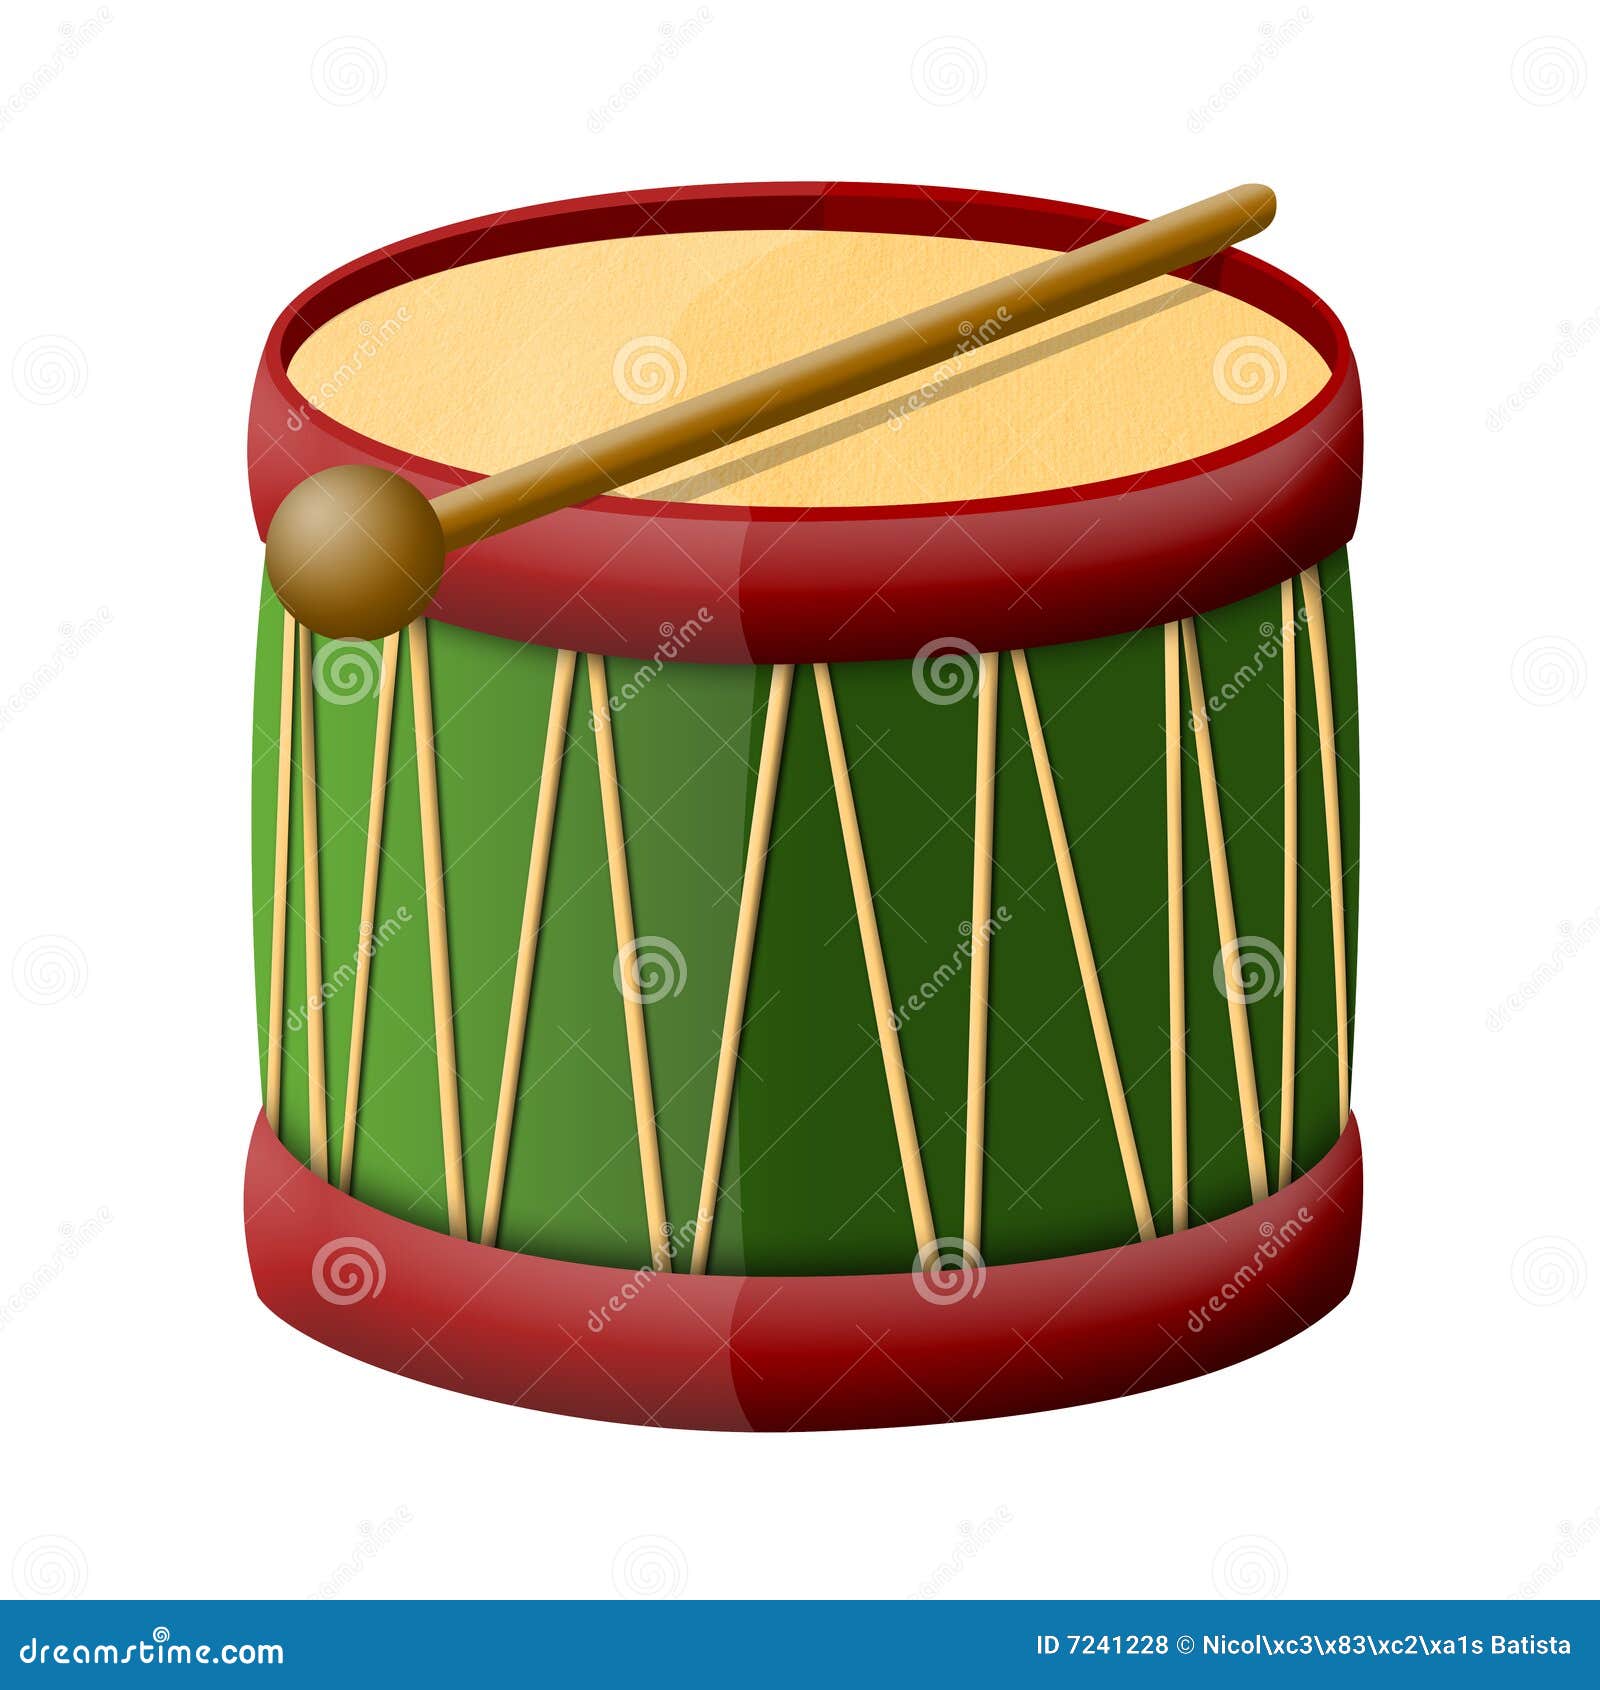 Toy Drum With A Drumsticks Royalty Free Stock Photos  Image: 7241228